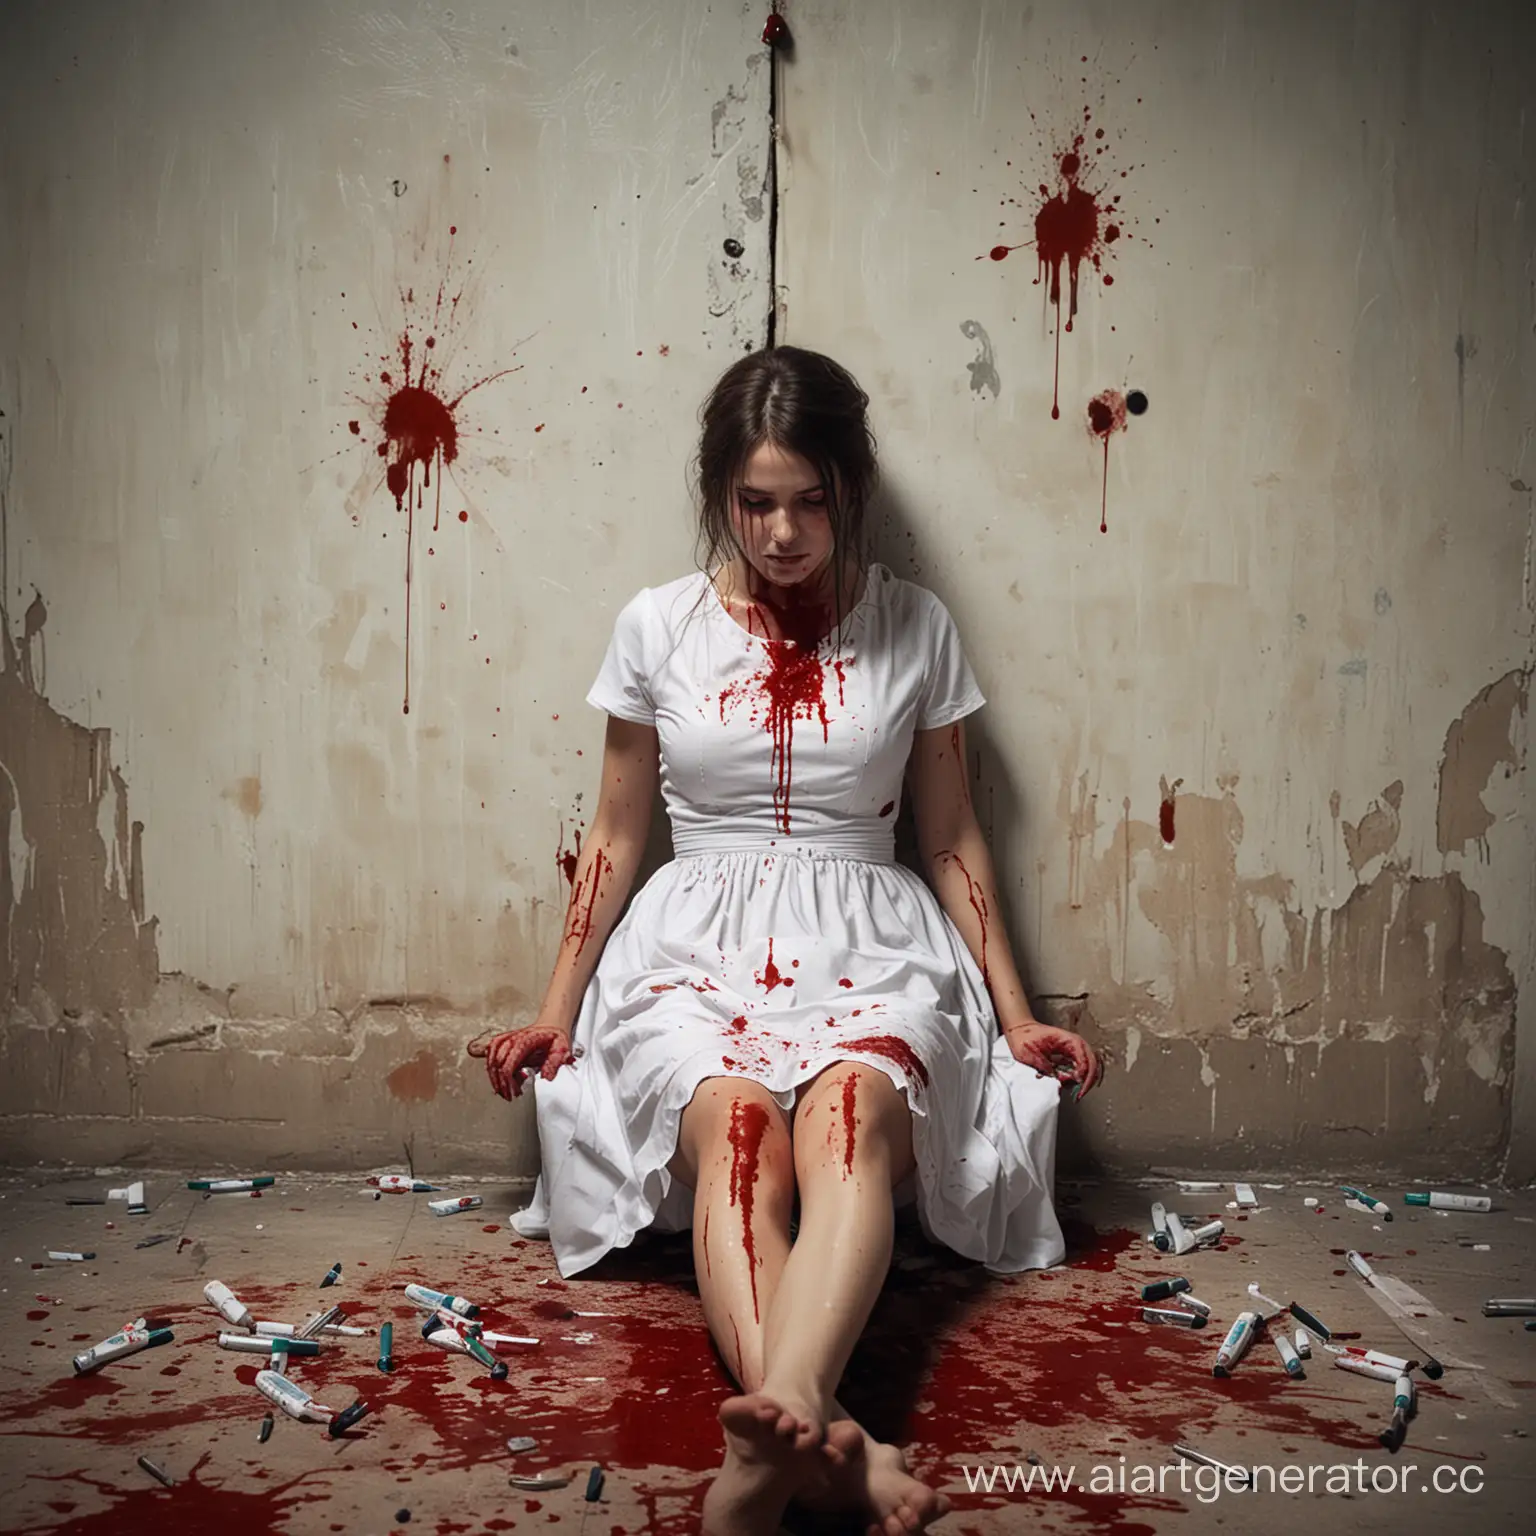 Bloodied-Entrance-Girl-in-White-Dress-with-Syringe